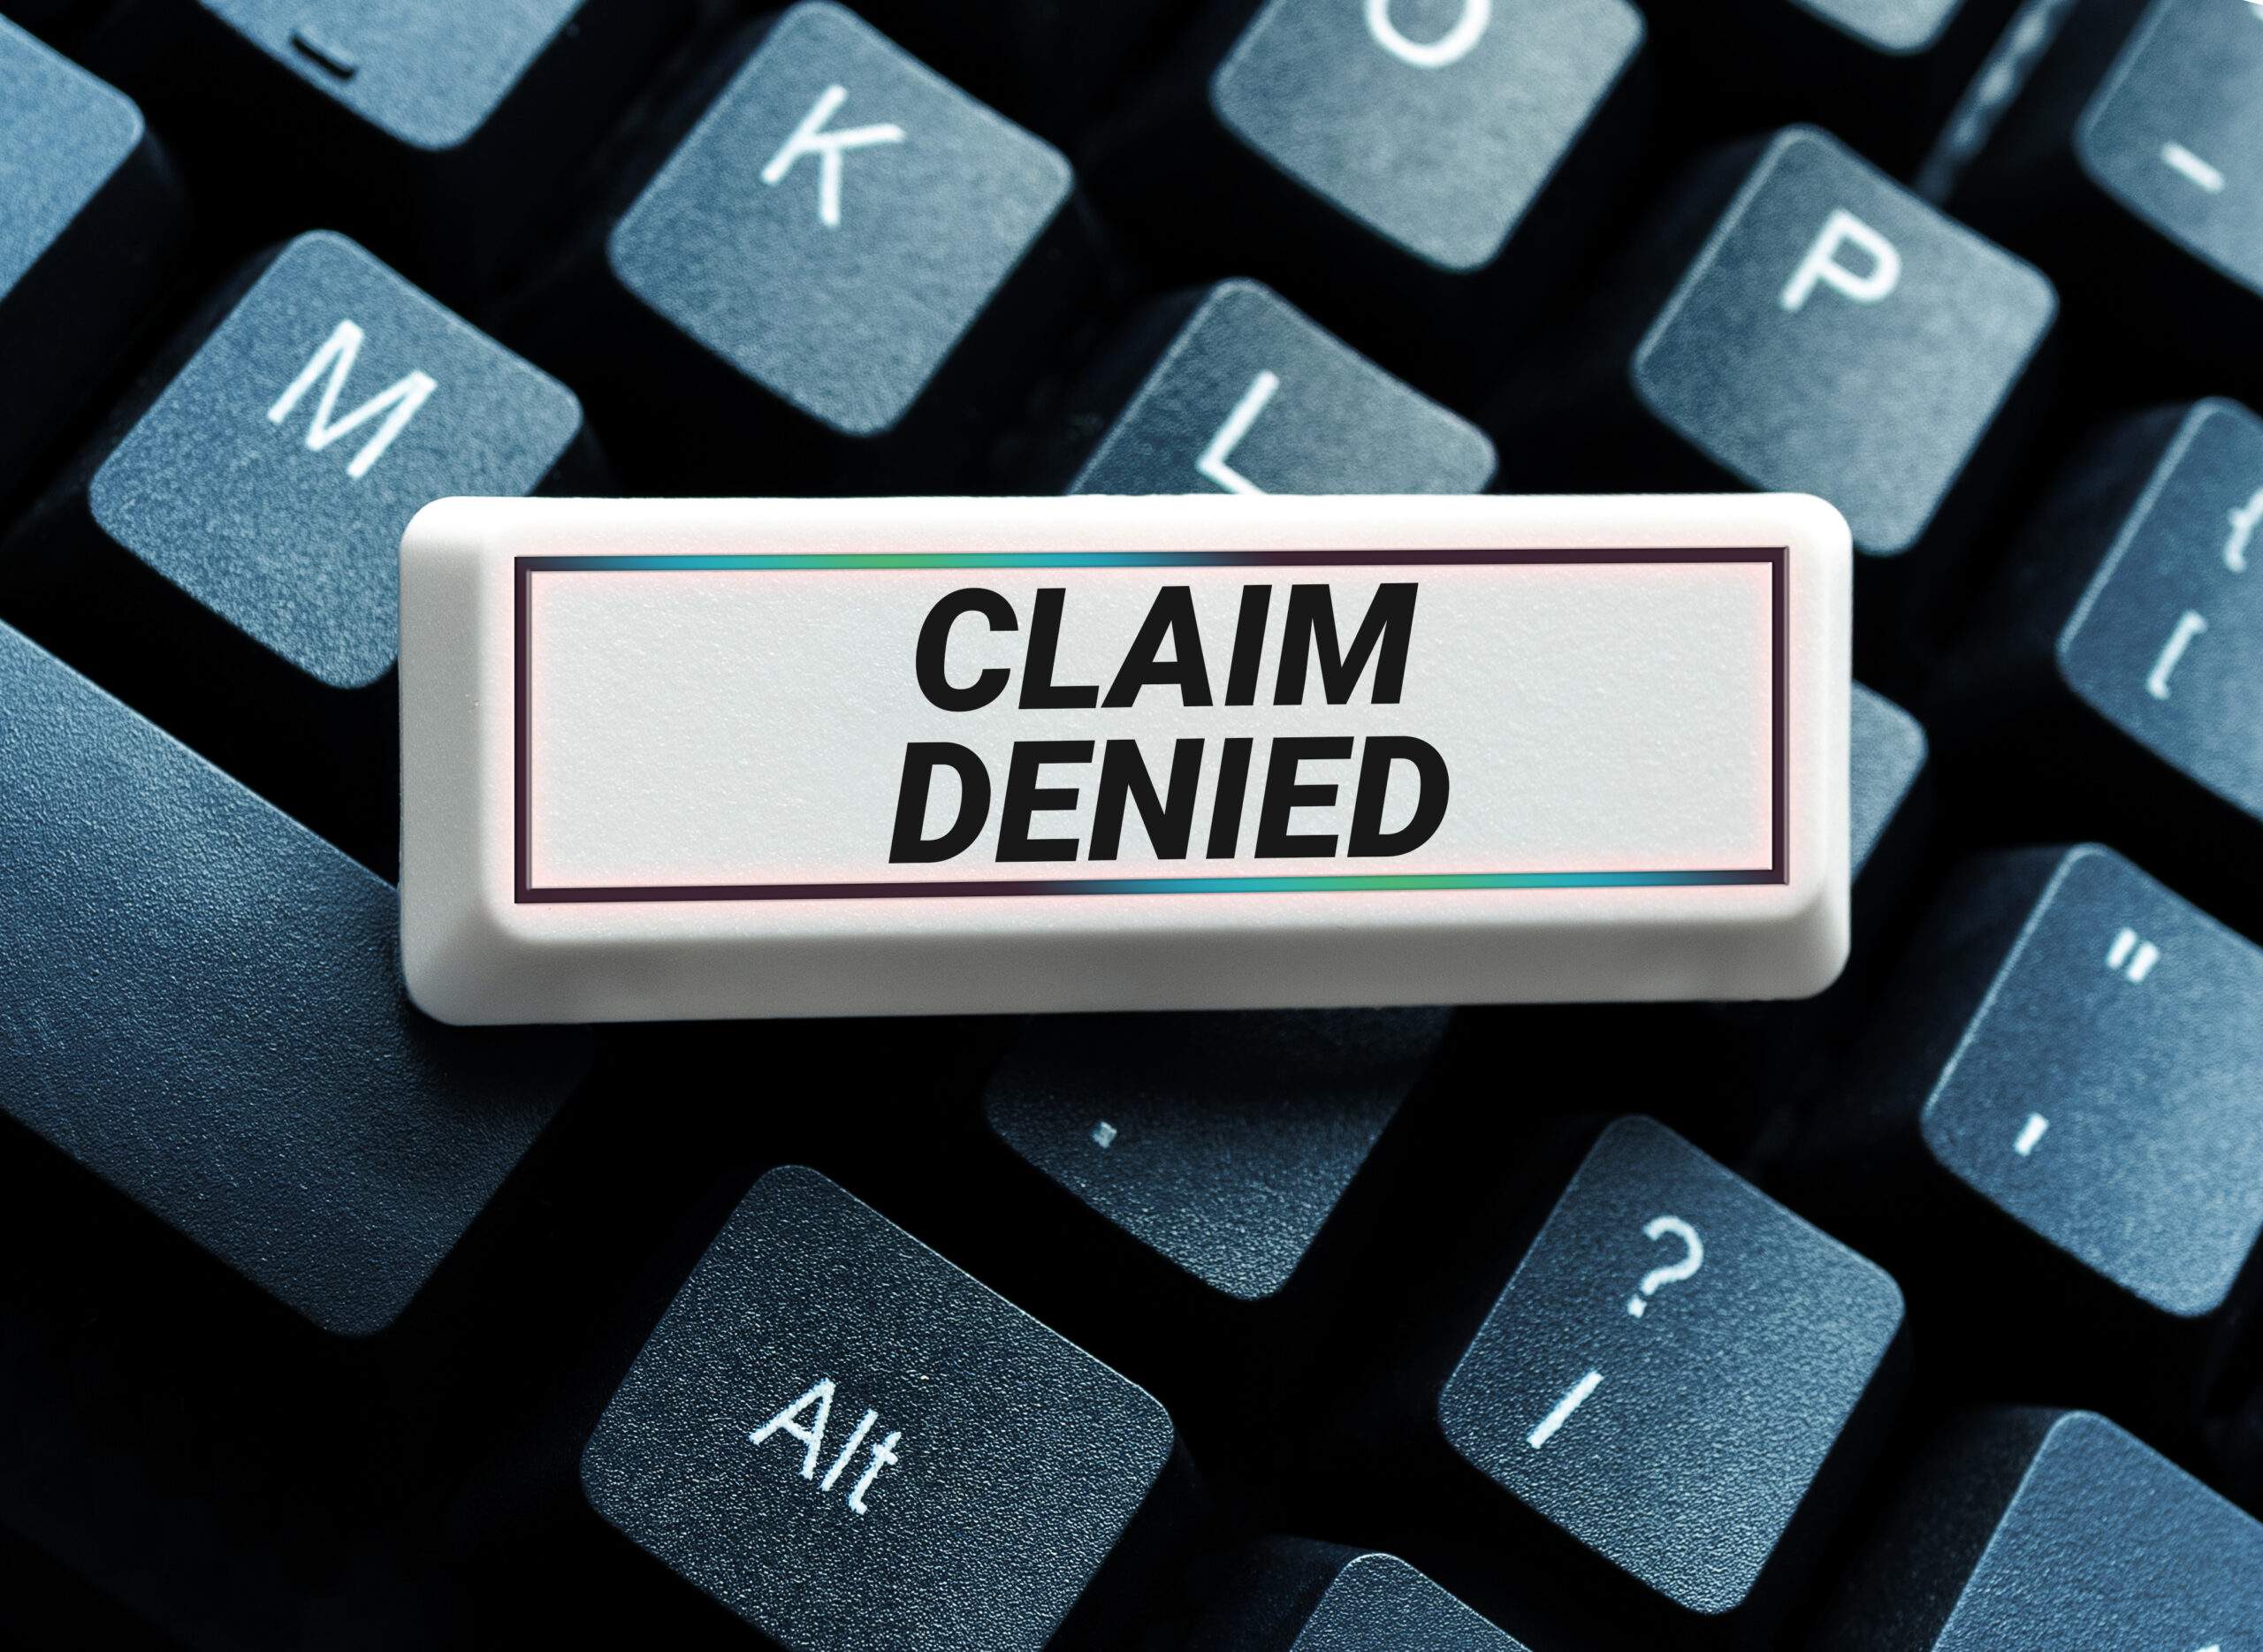 Image showing concept of how cyber insurance claims are denied.